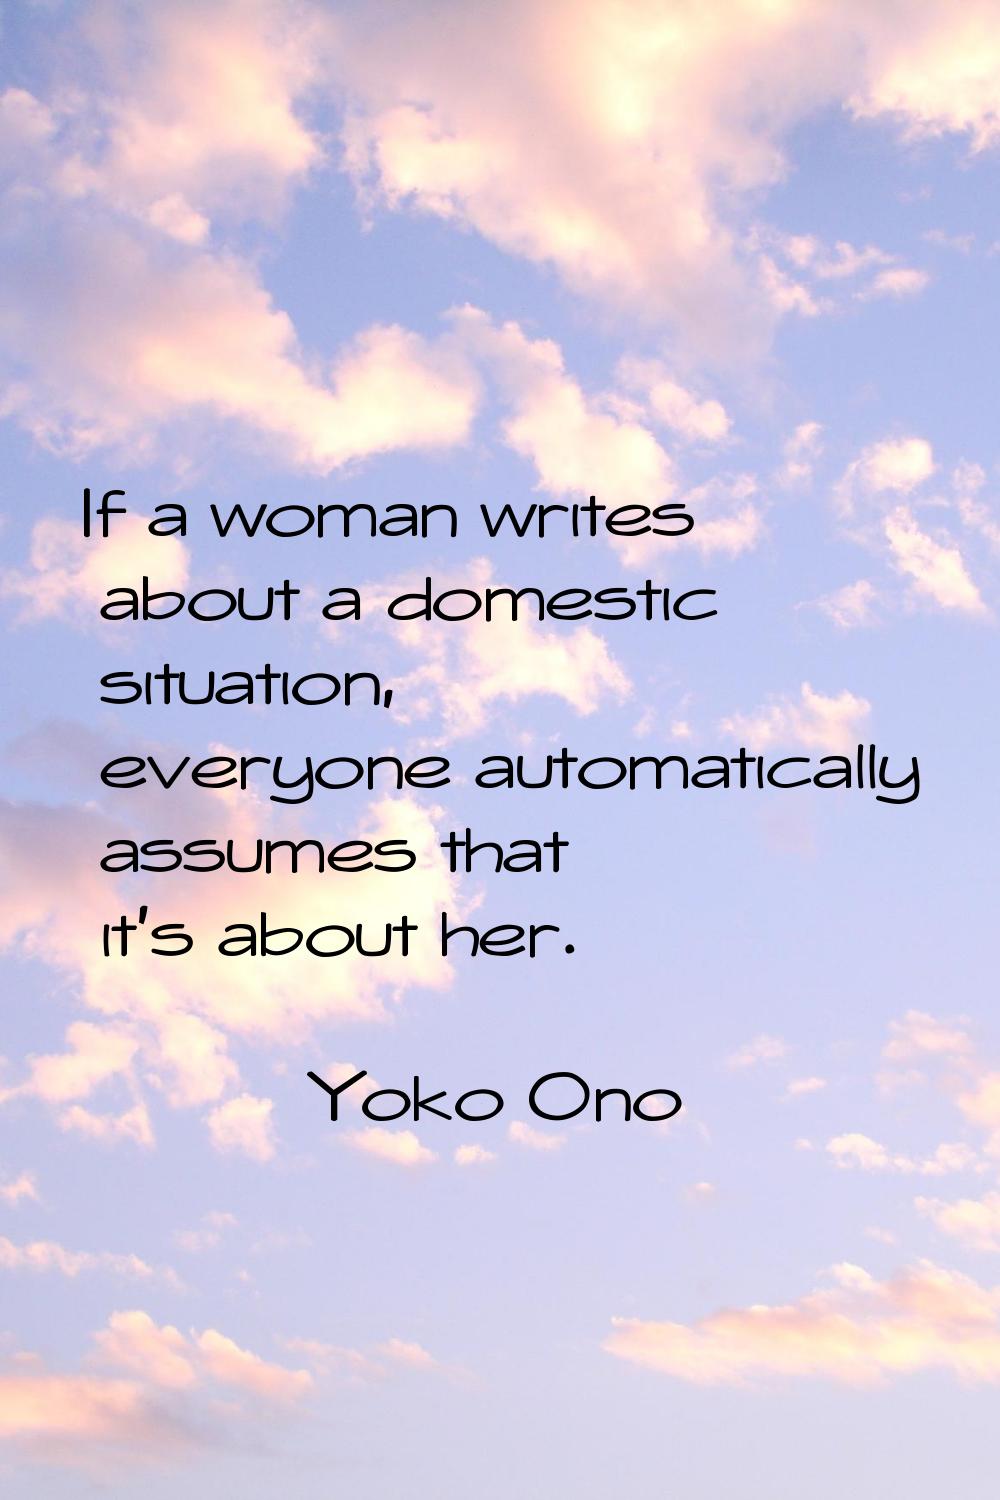 If a woman writes about a domestic situation, everyone automatically assumes that it's about her.